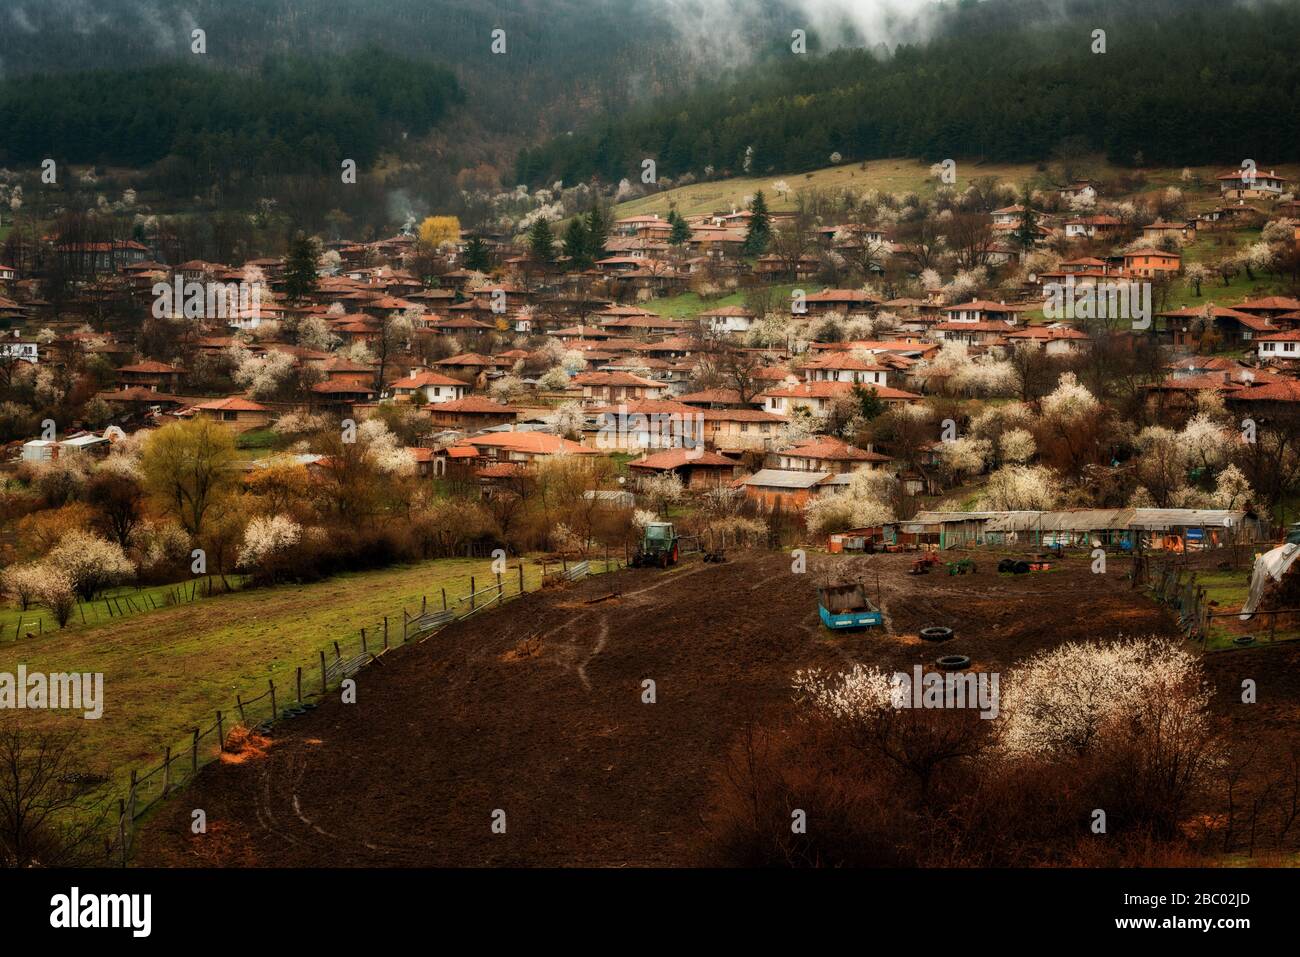 Spring view at Zheravna, Bulgaria. Architectural reserve of rustic houses and narrow cobbled streets from the Bulgarian national revival period. Stock Photo